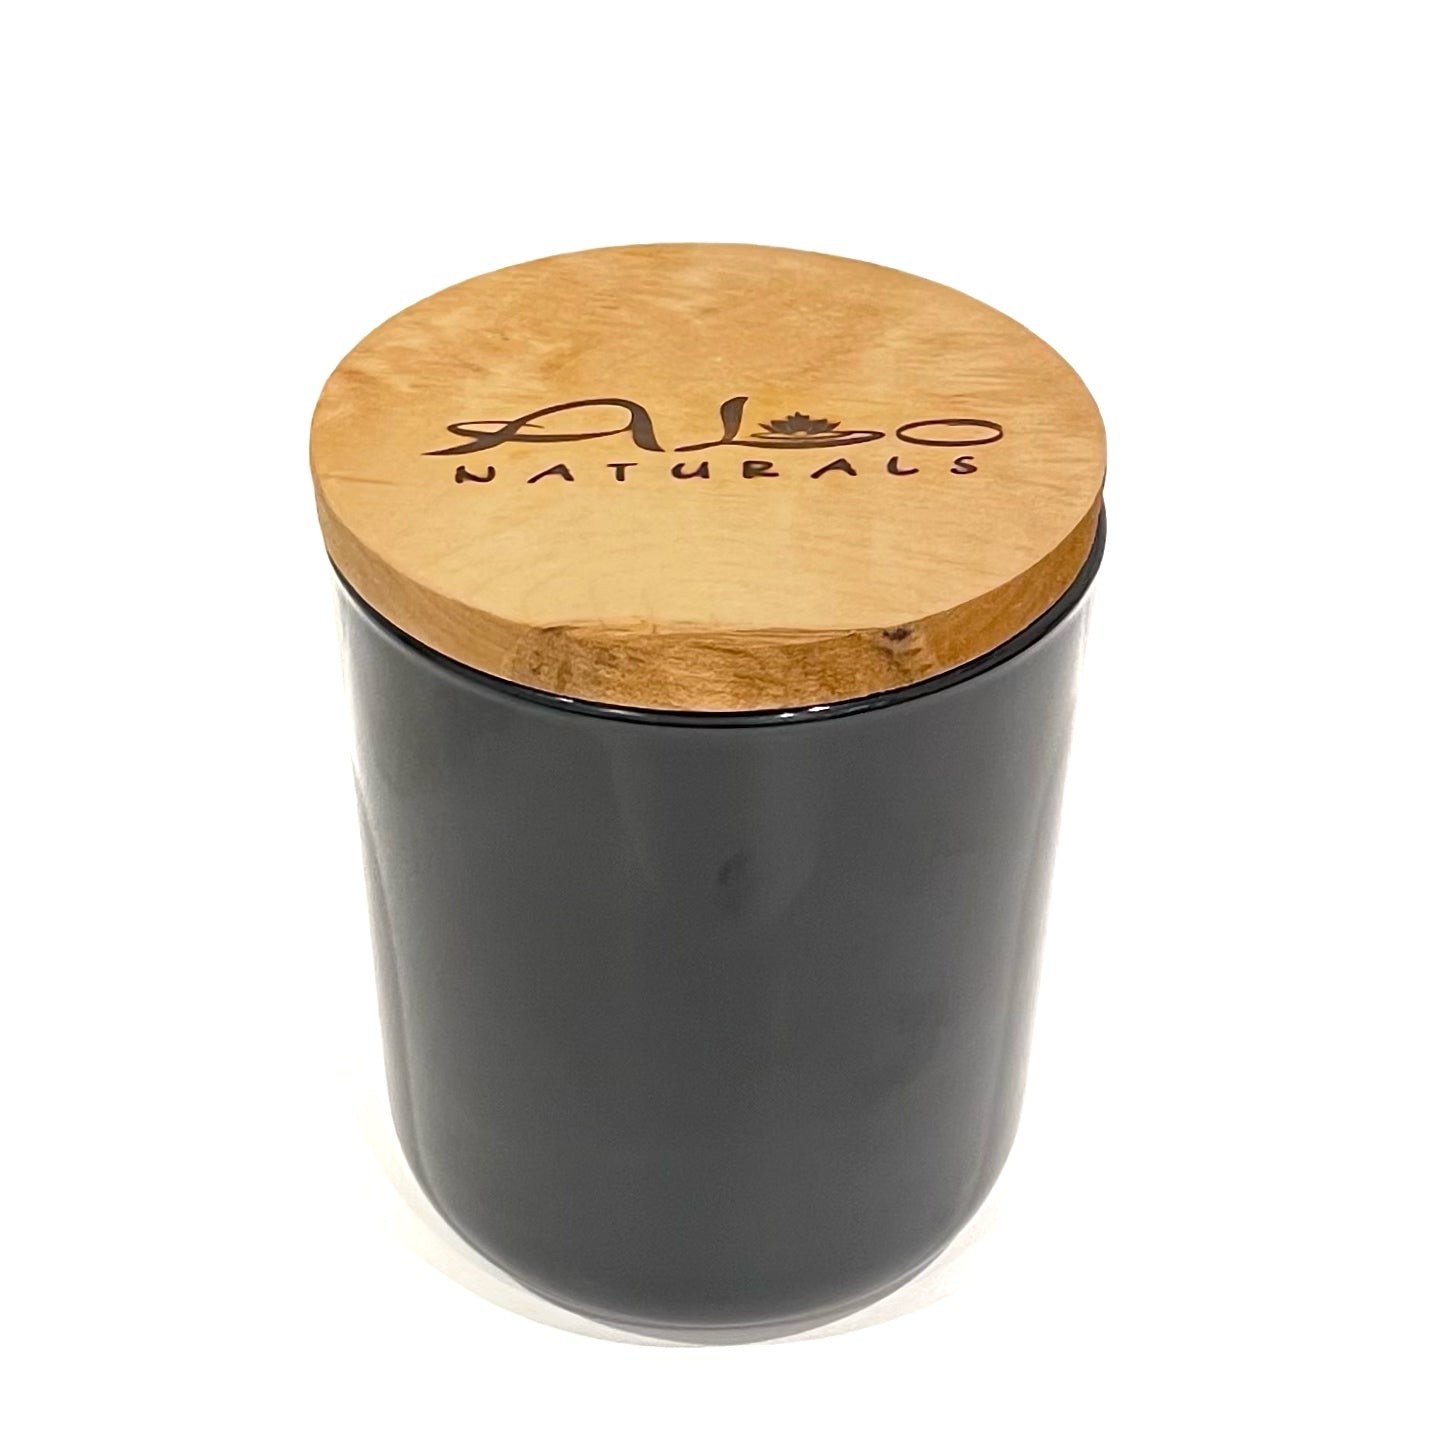 This masculine fragrance has notes of woody sandalwood, patchouli, amber, oud and rich resins. Fresh and Clean! Hand poured with 13 ounces of soy wax in a translucent gray glass vessel with maple wood lid and a cotton wick for a bright flame. Enjoy over 75 hours of burn time.